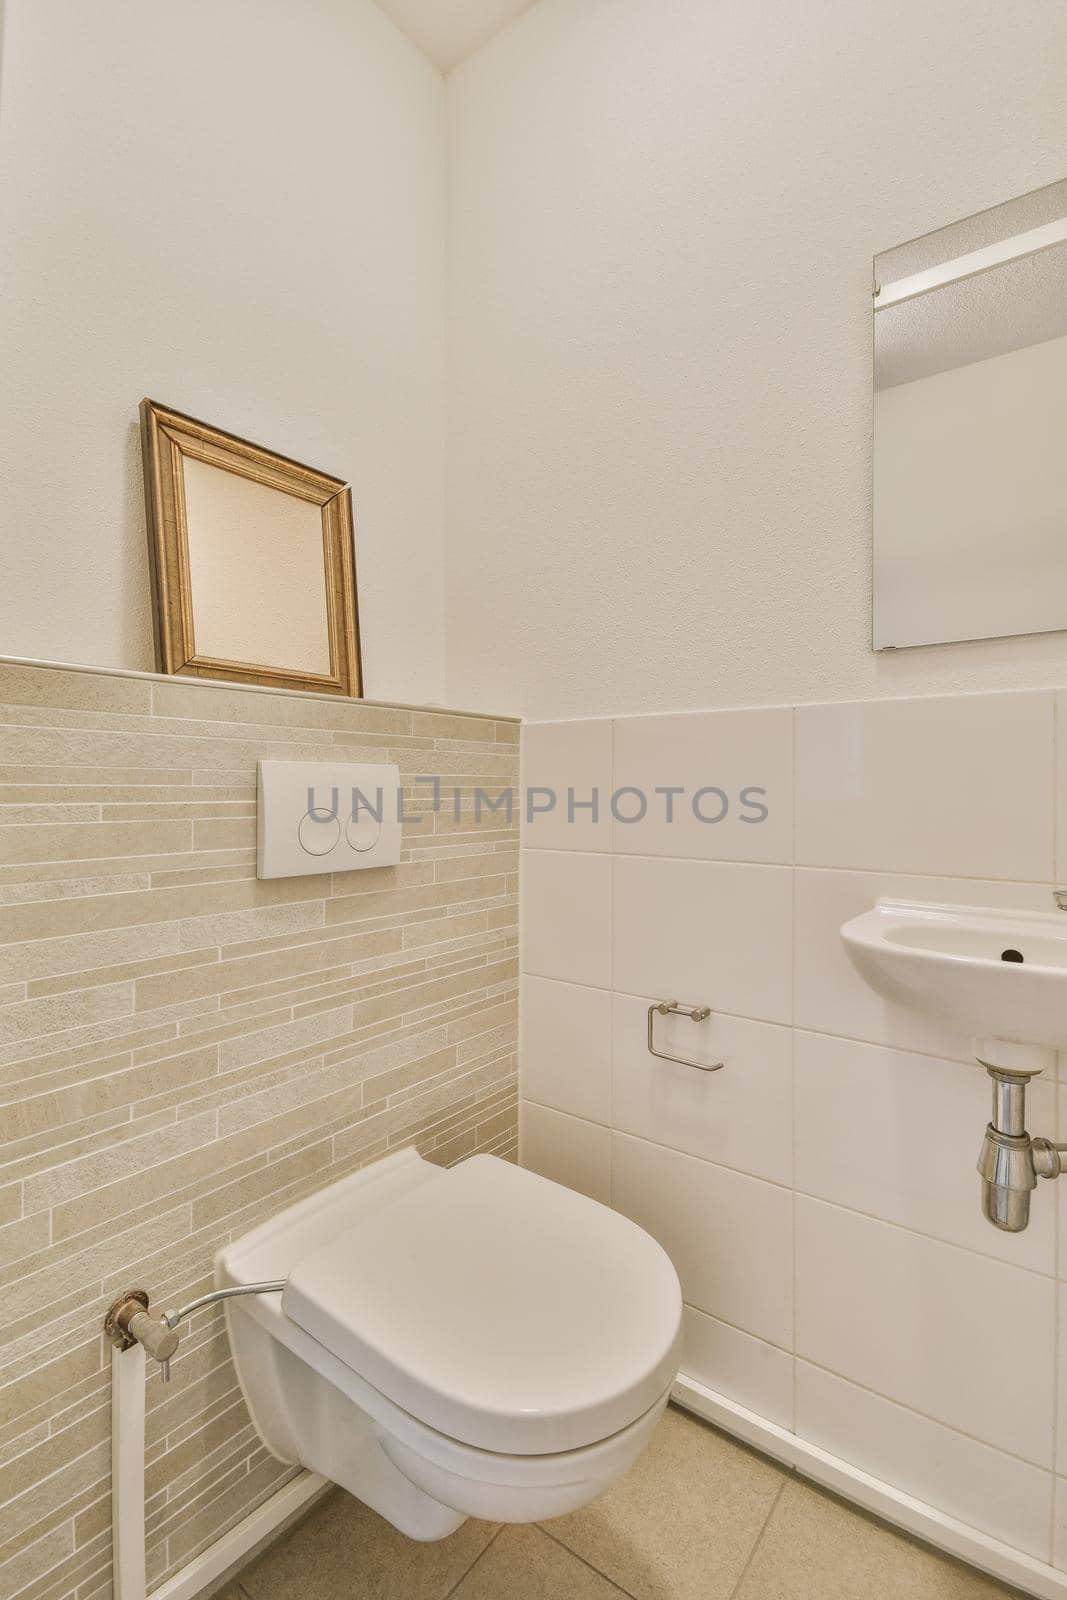 Bathroom interior finished with white tiles with a toilet and sink in a modern house